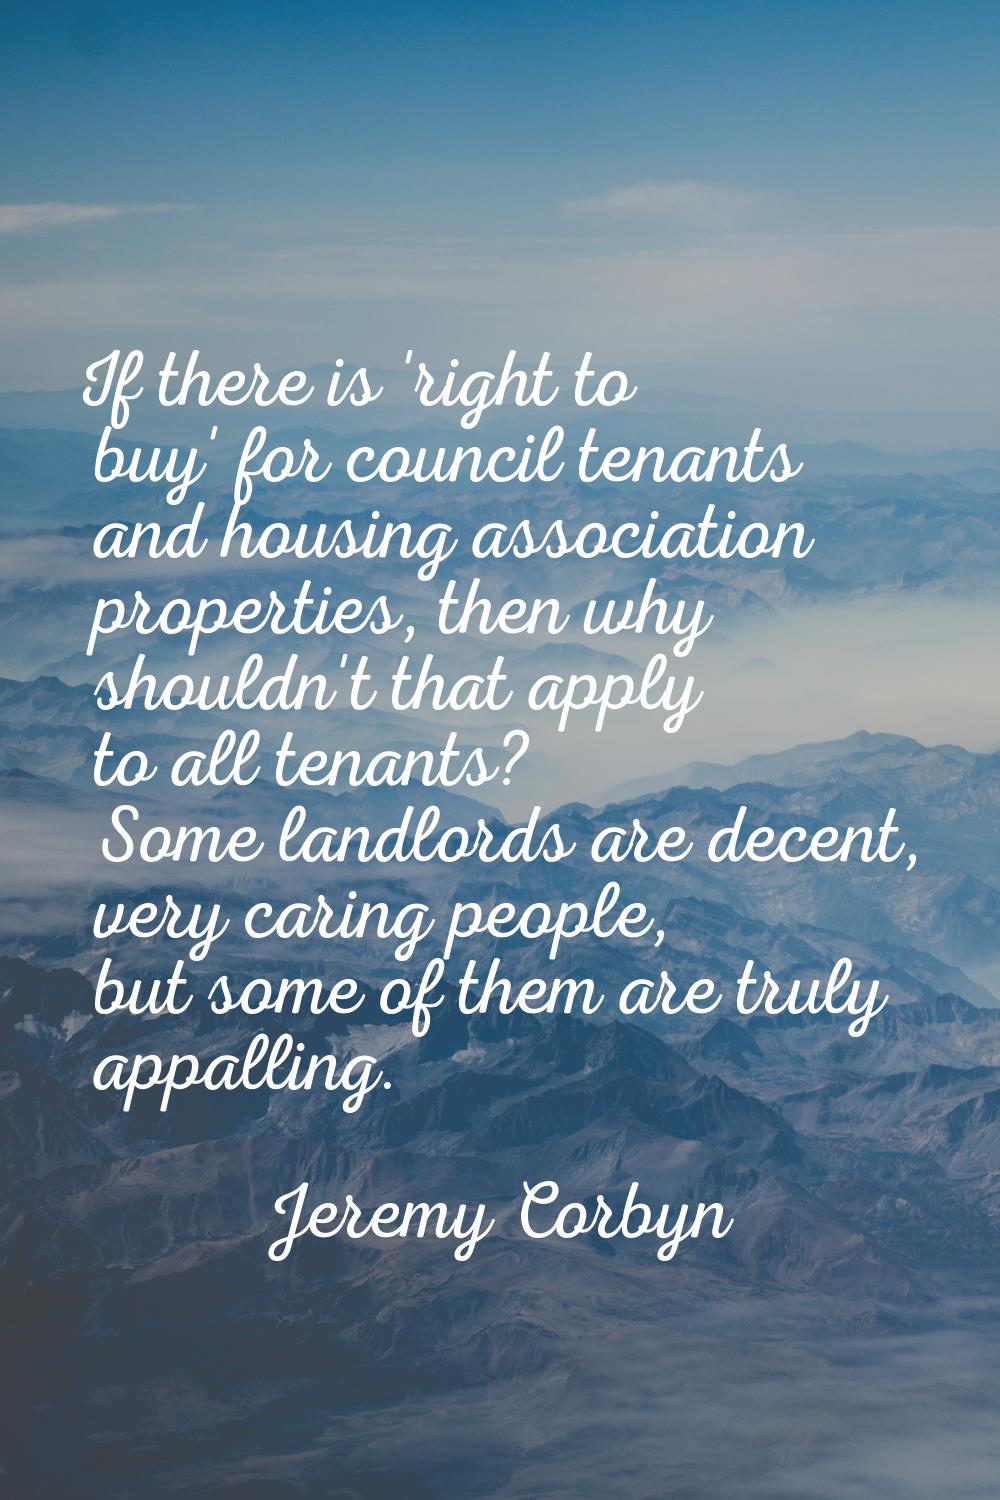 If there is 'right to buy' for council tenants and housing association properties, then why shouldn